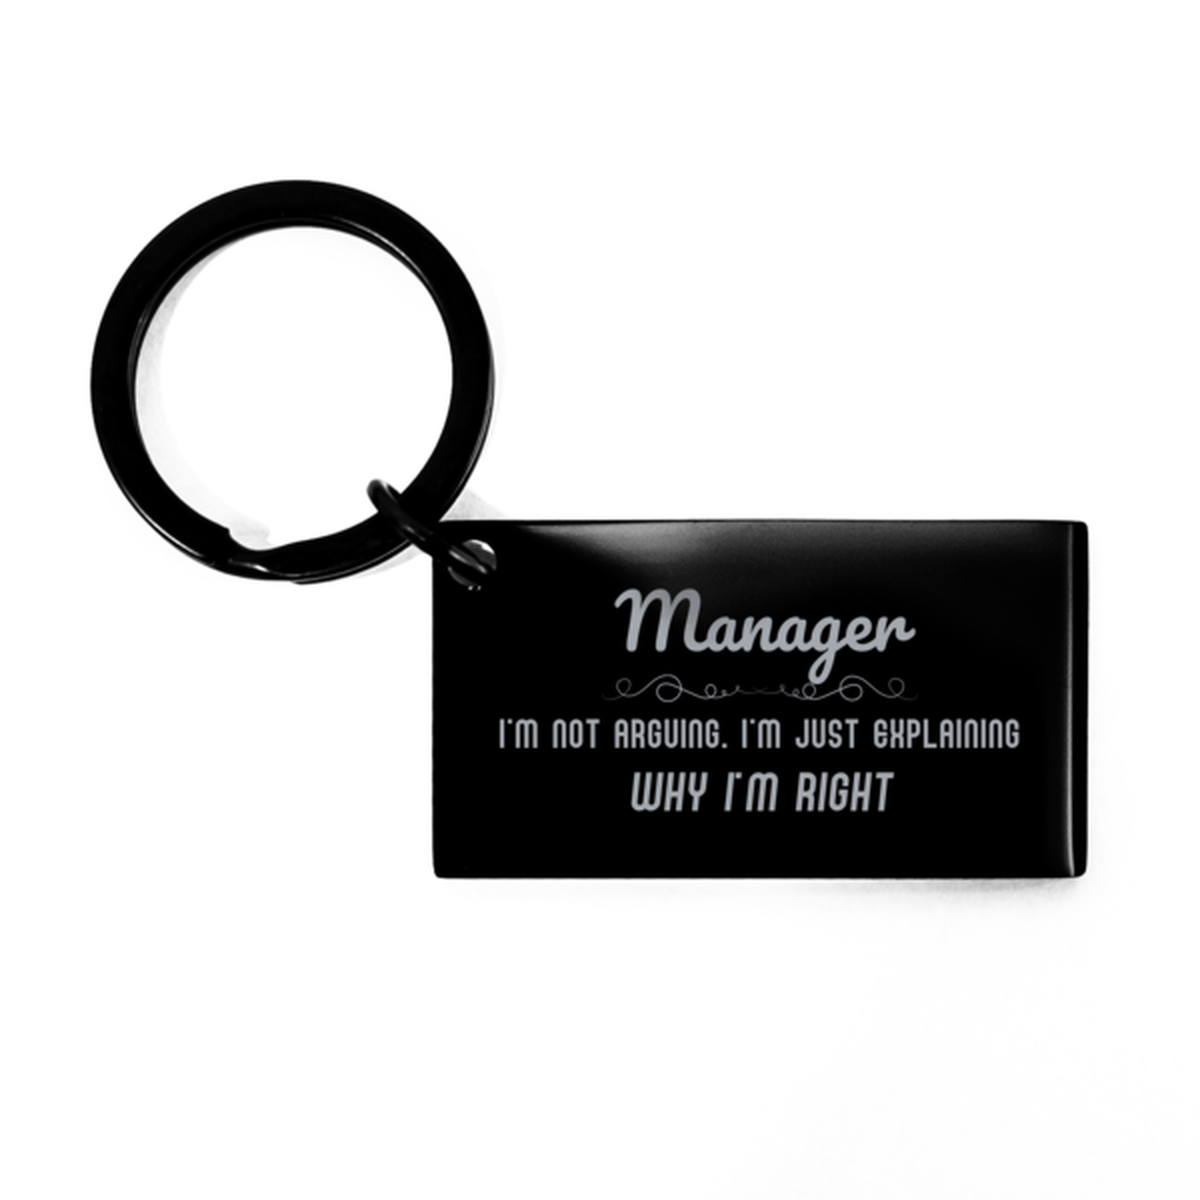 Manager I'm not Arguing. I'm Just Explaining Why I'm RIGHT Keychain, Funny Saying Quote Manager Gifts For Manager Graduation Birthday Christmas Gifts for Men Women Coworker